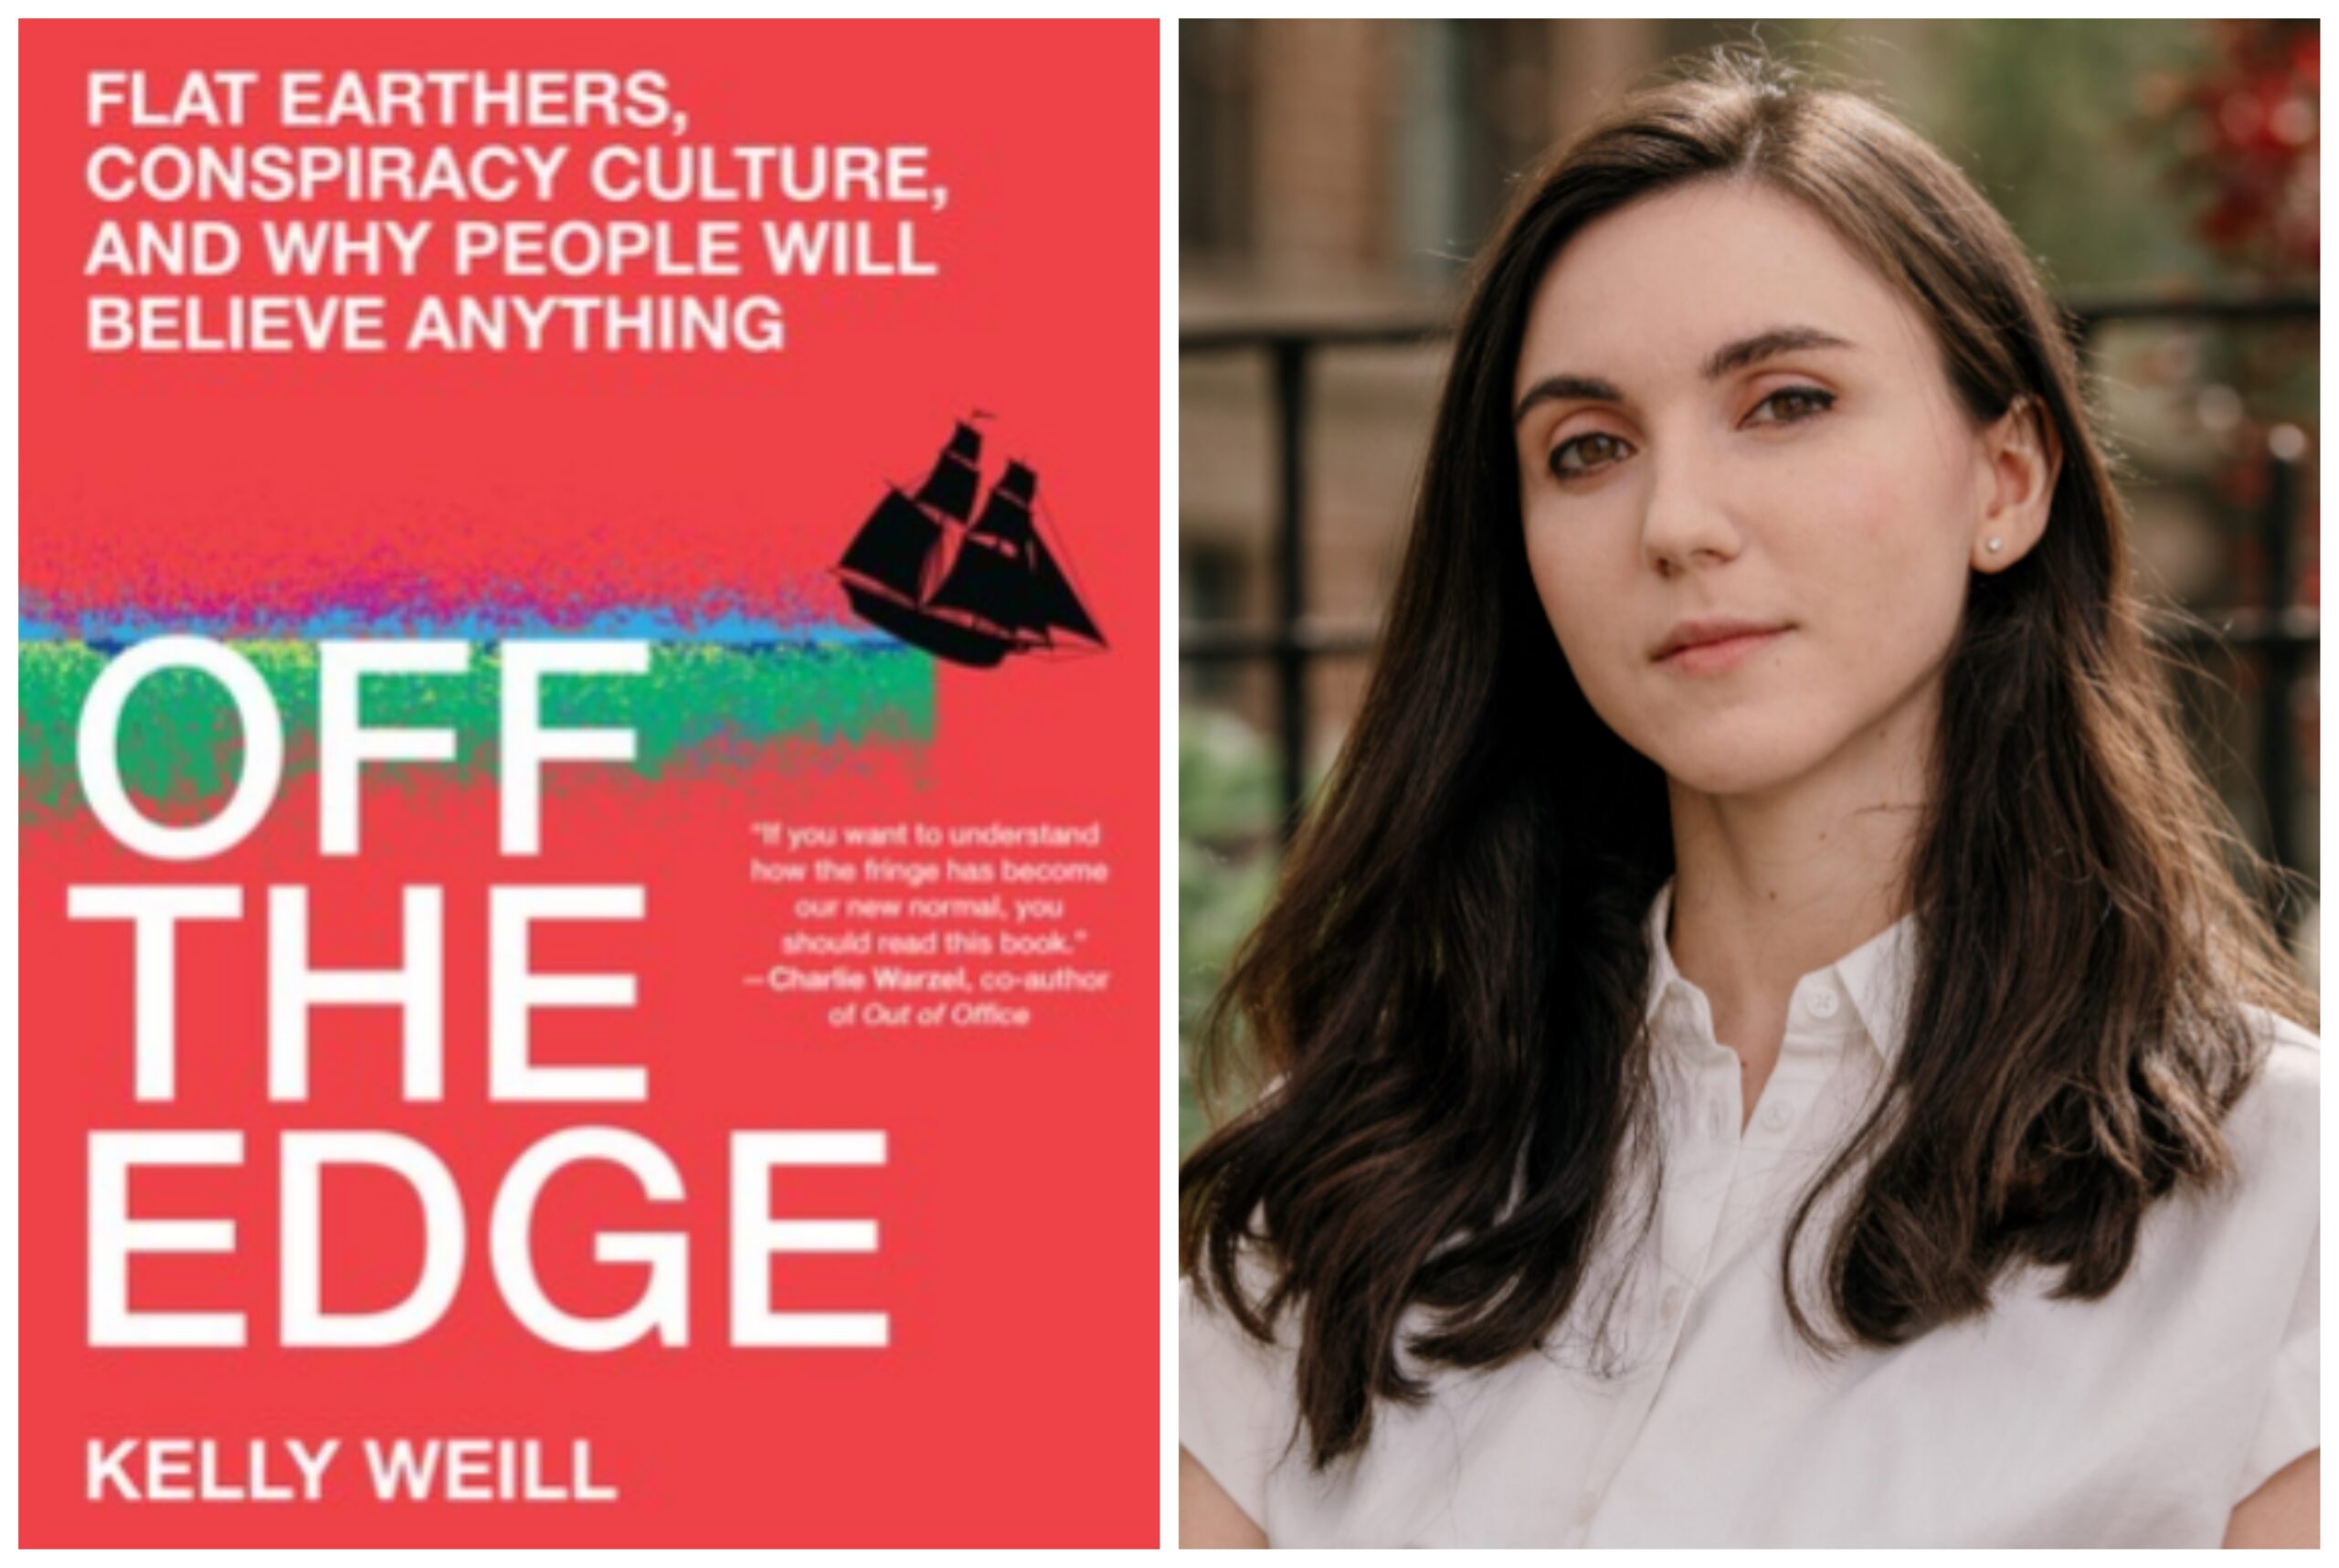 Author Kelly Weill and the cover of her new book, “Off the Edge: Flat Earthers, Conspiracy Culture and Why People Will Believe Anything.”